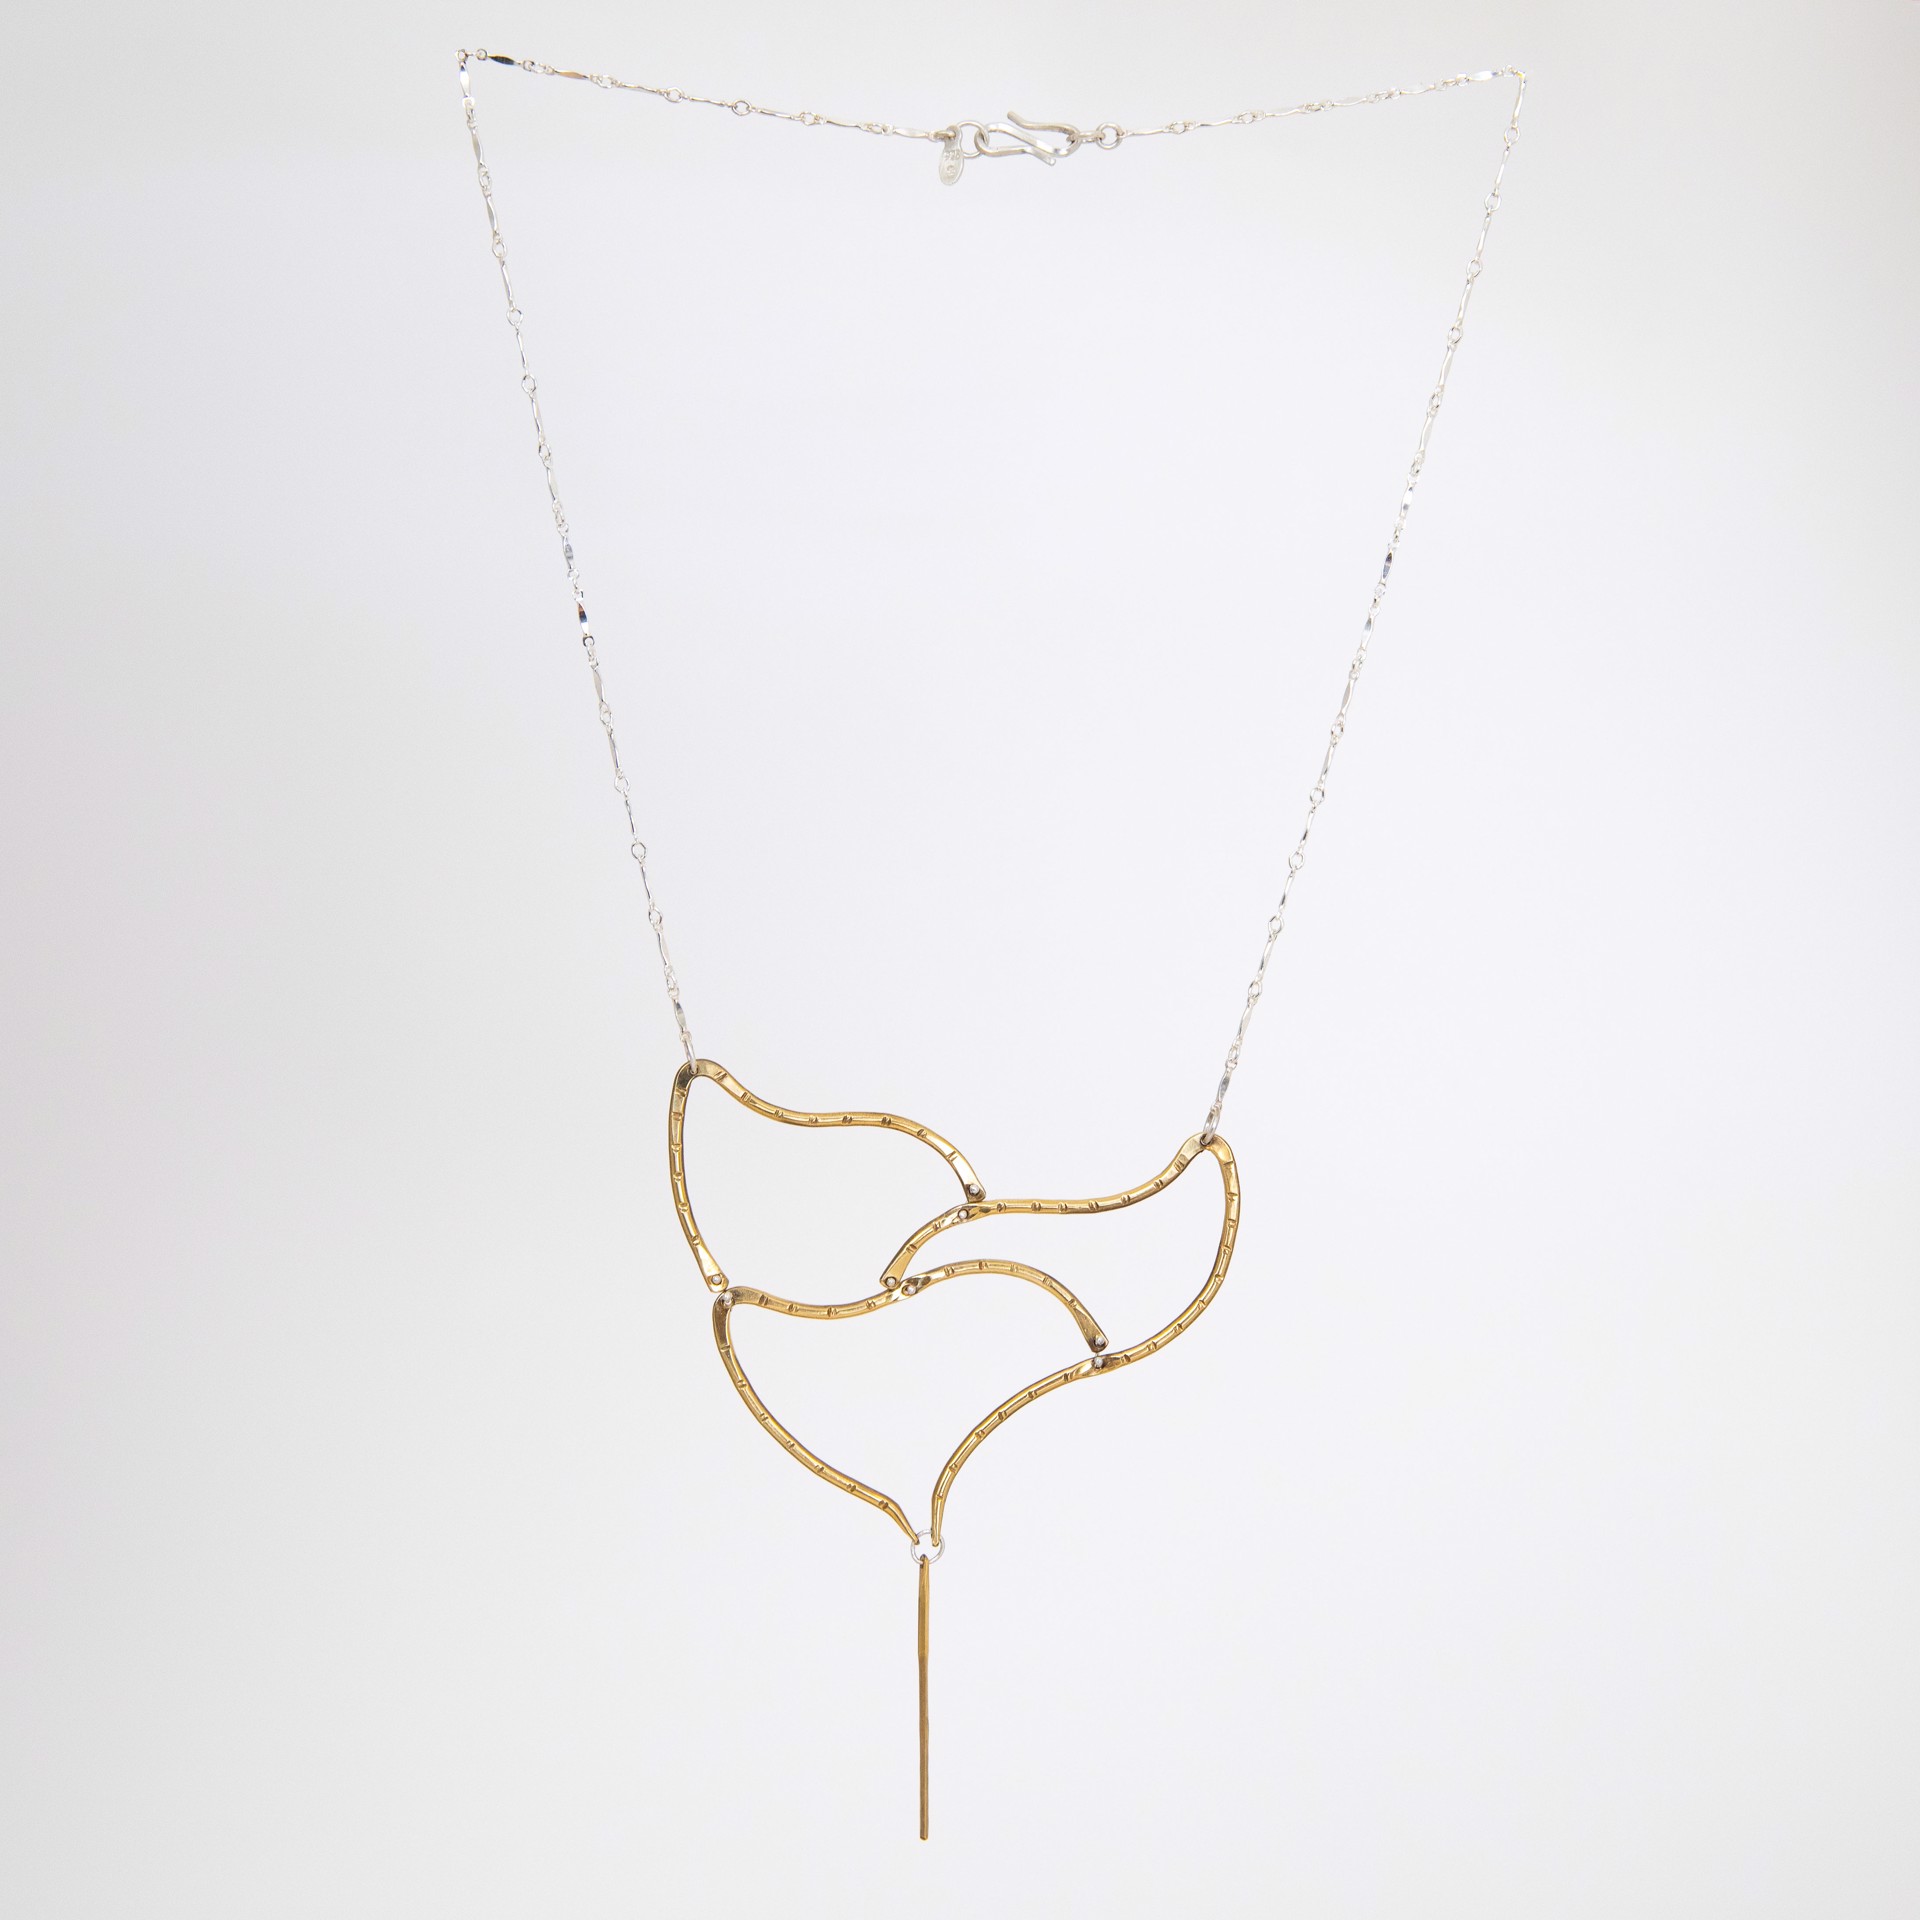 Agave Necklace - Brass by Clementine & Co. Jewelry